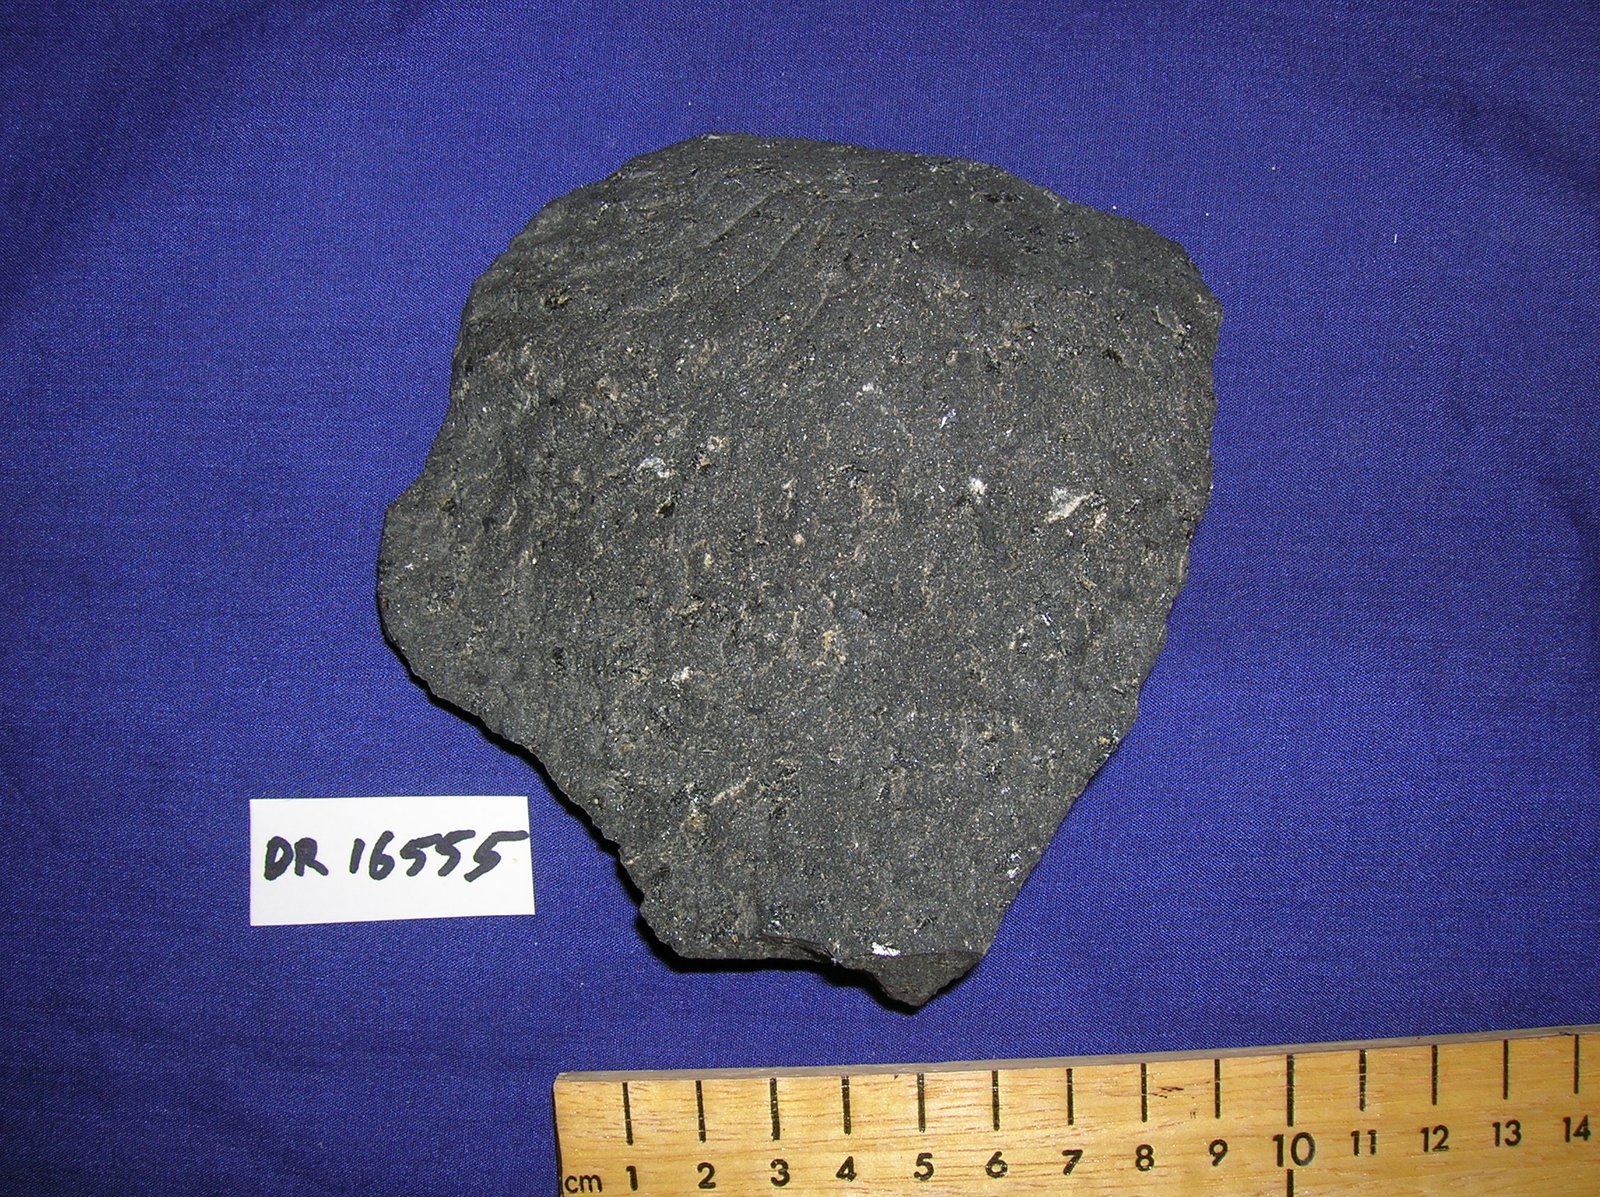 Basalt from Deccan traps